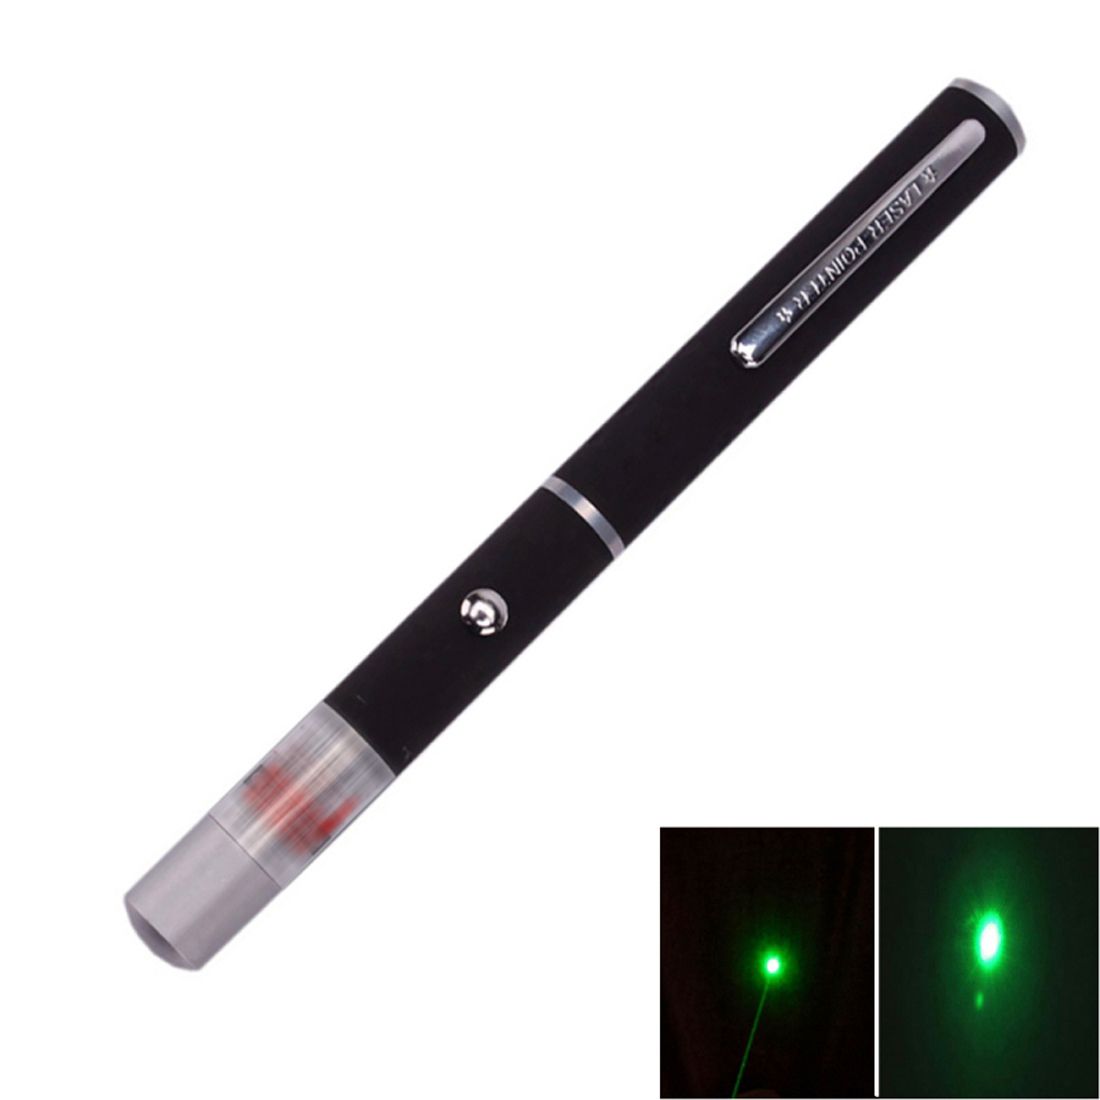     			Battery Operated High Power Green Laser Pointer Pen